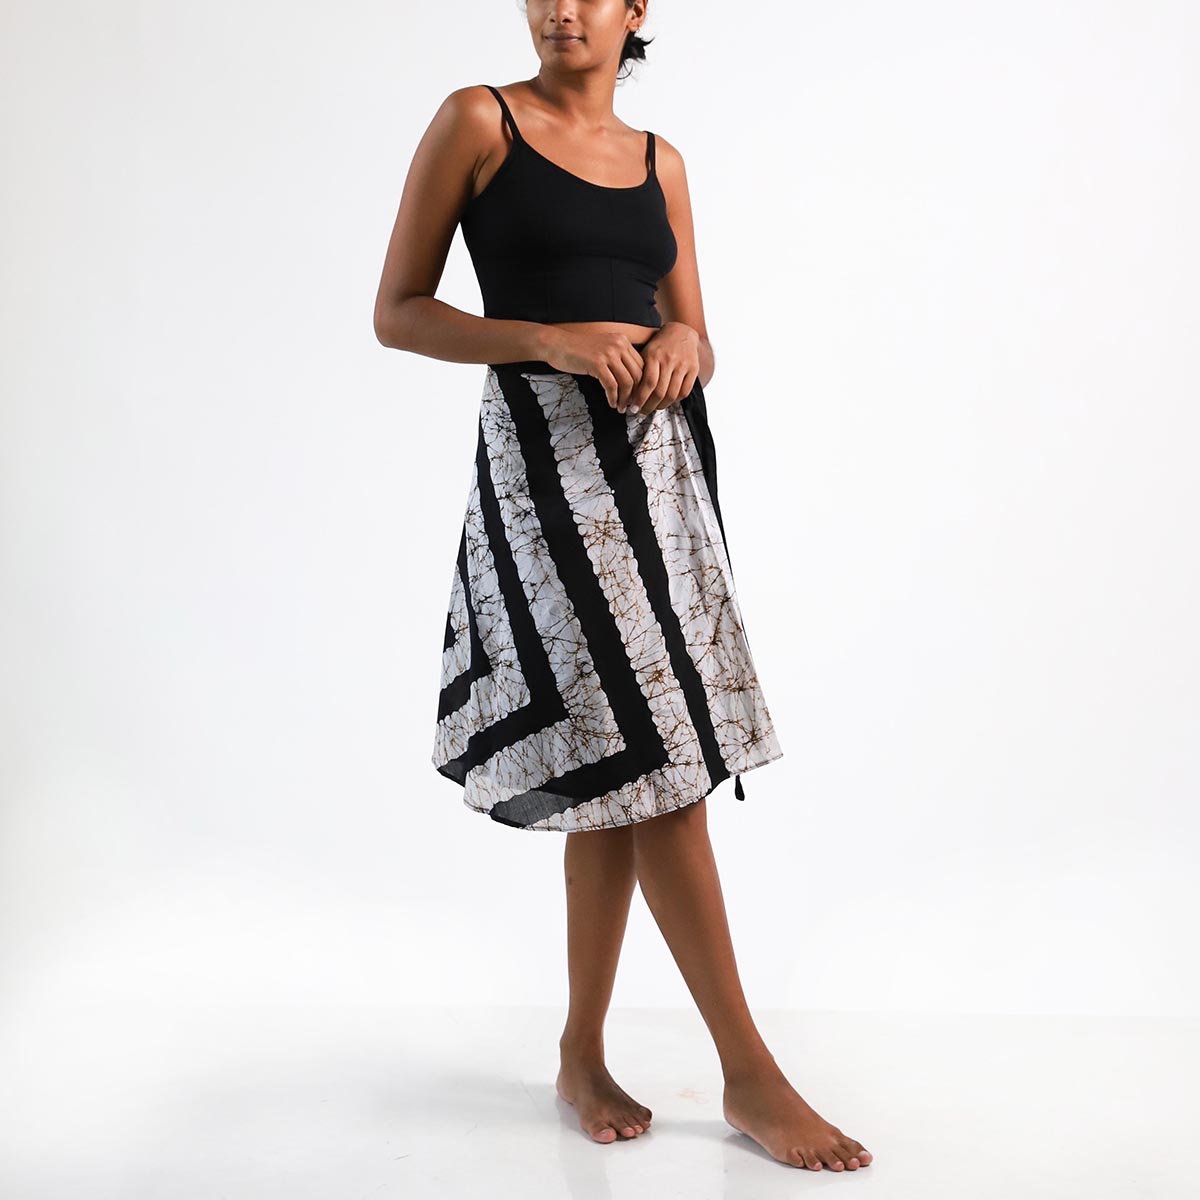 Classic Black and White Batik Wrap Skirt | Who We Are